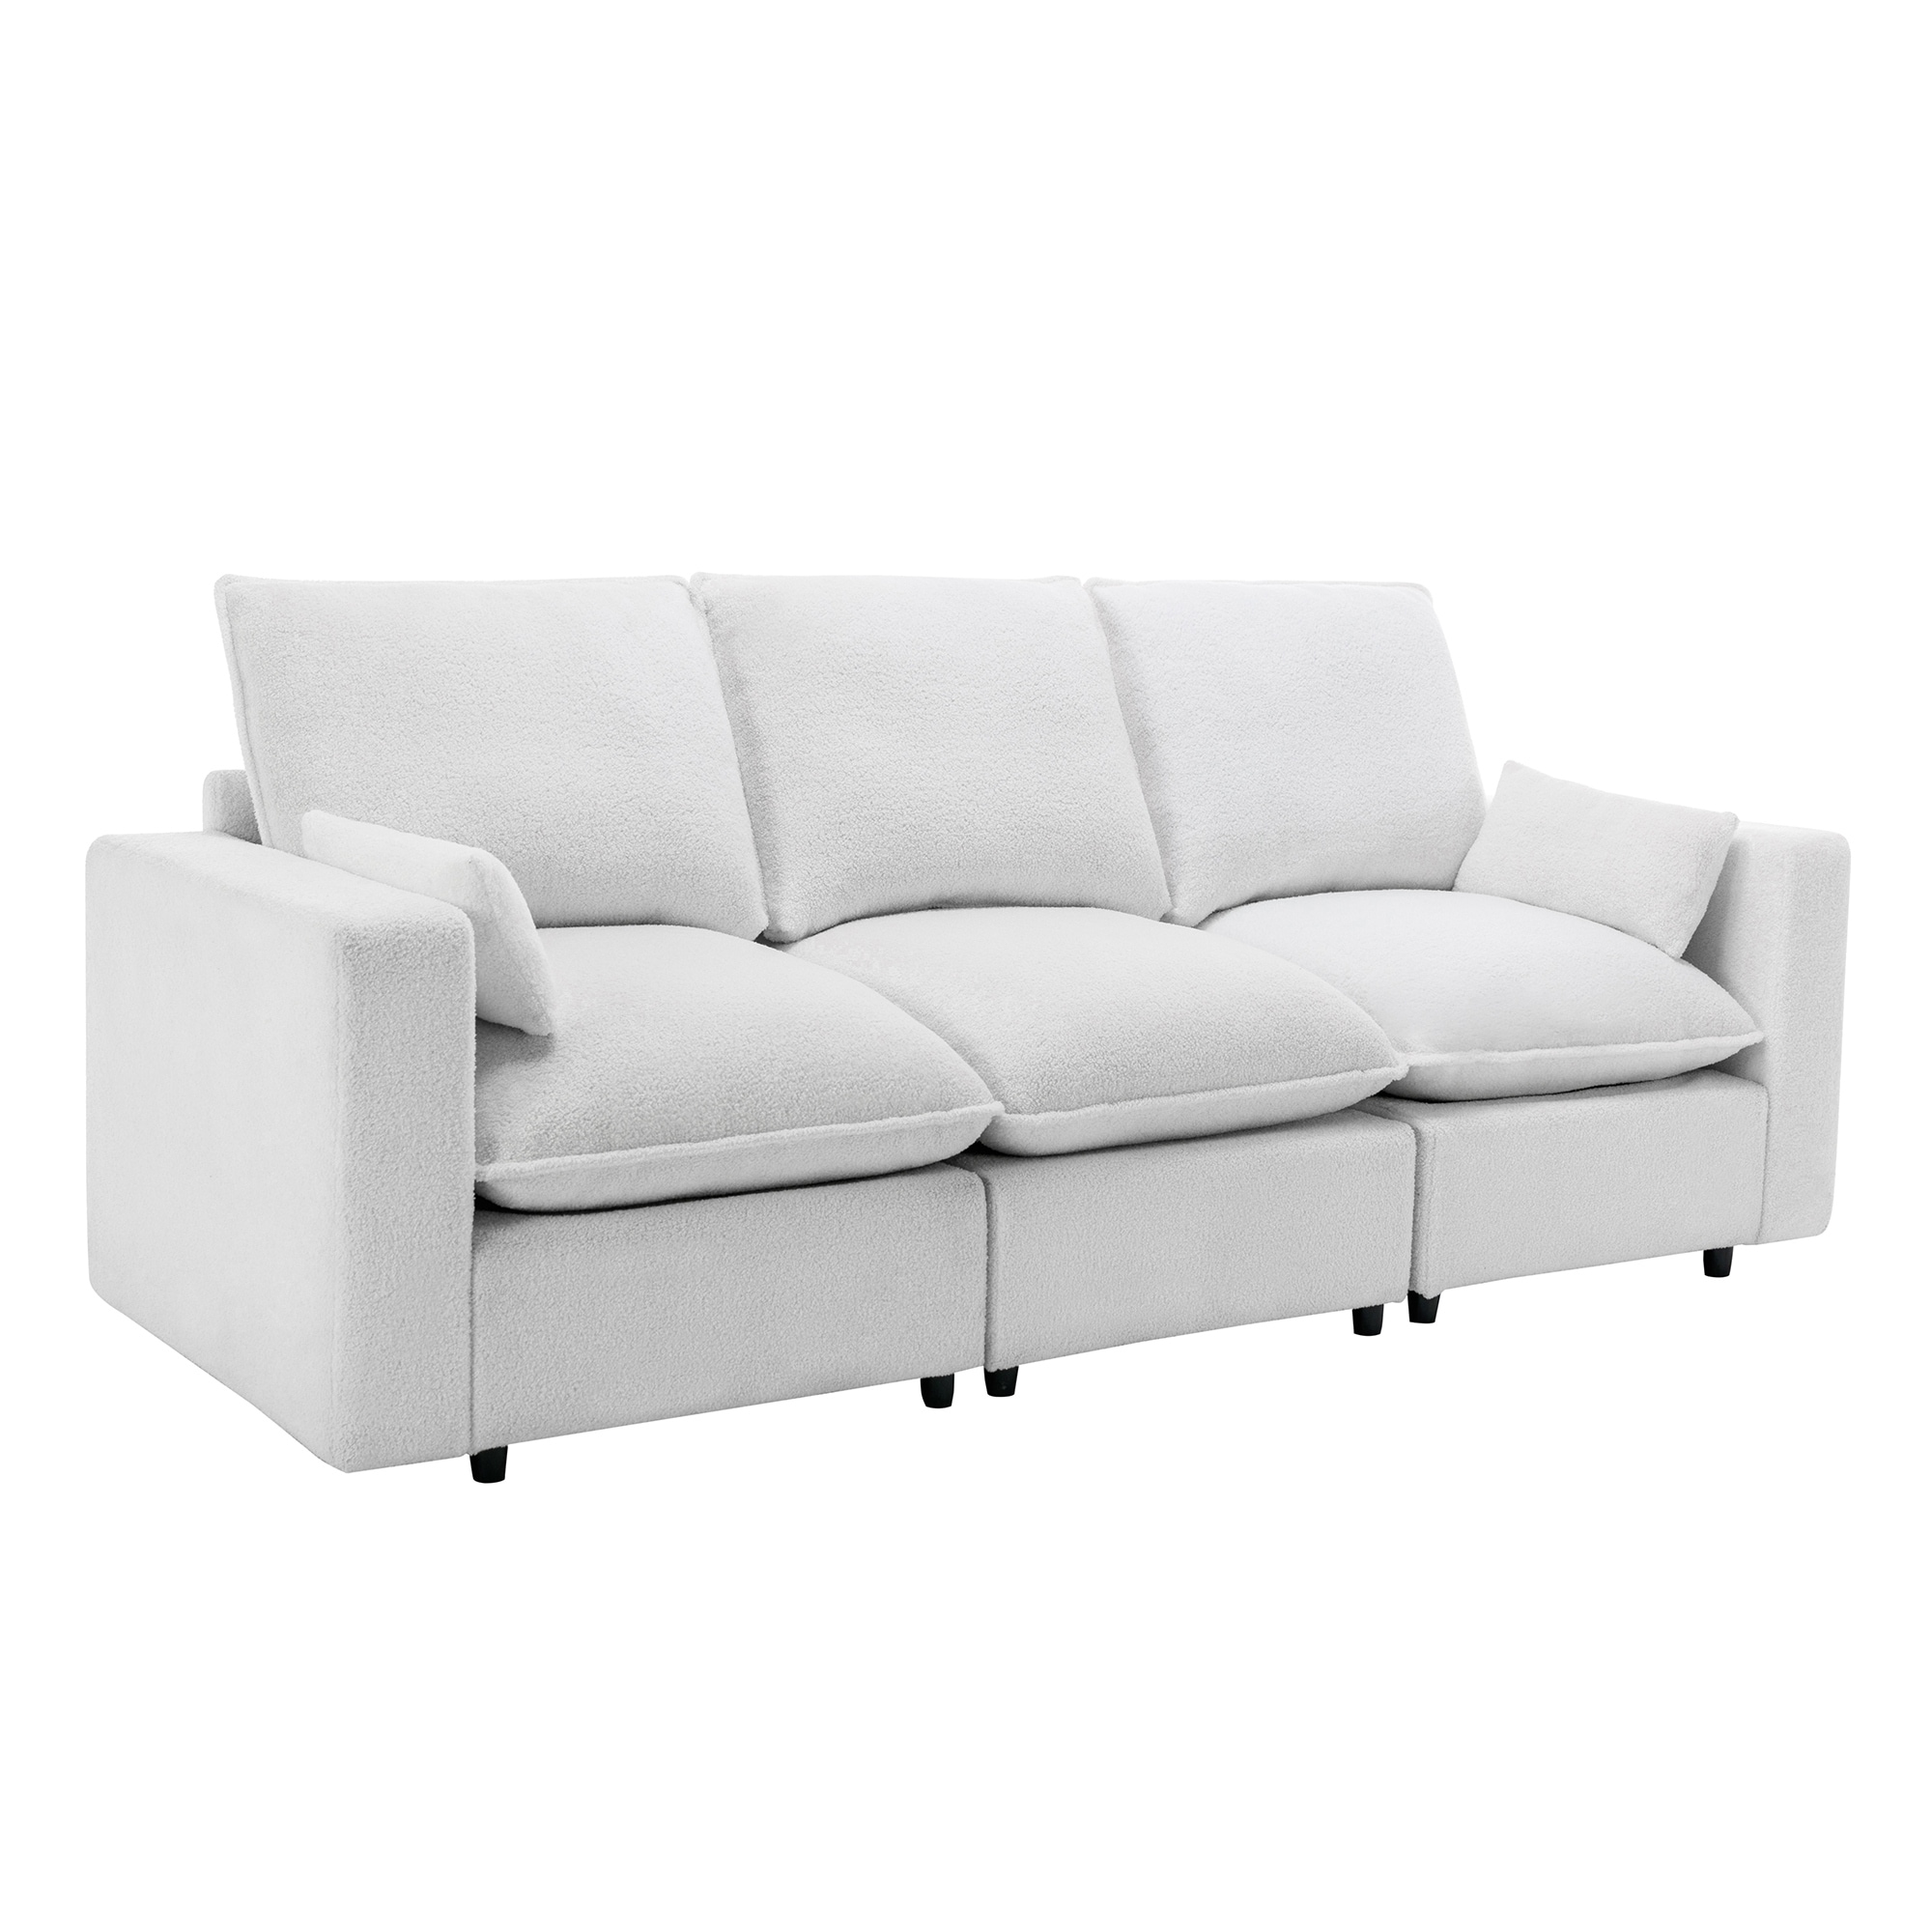 https://ak1.ostkcdn.com/images/products/is/images/direct/55c9feba66b06704961e3991484d6aacc7367a4c/3-Seat-Sofa-with-Removable-Back-and-Seat-Cushions-and-2-pillows.jpg